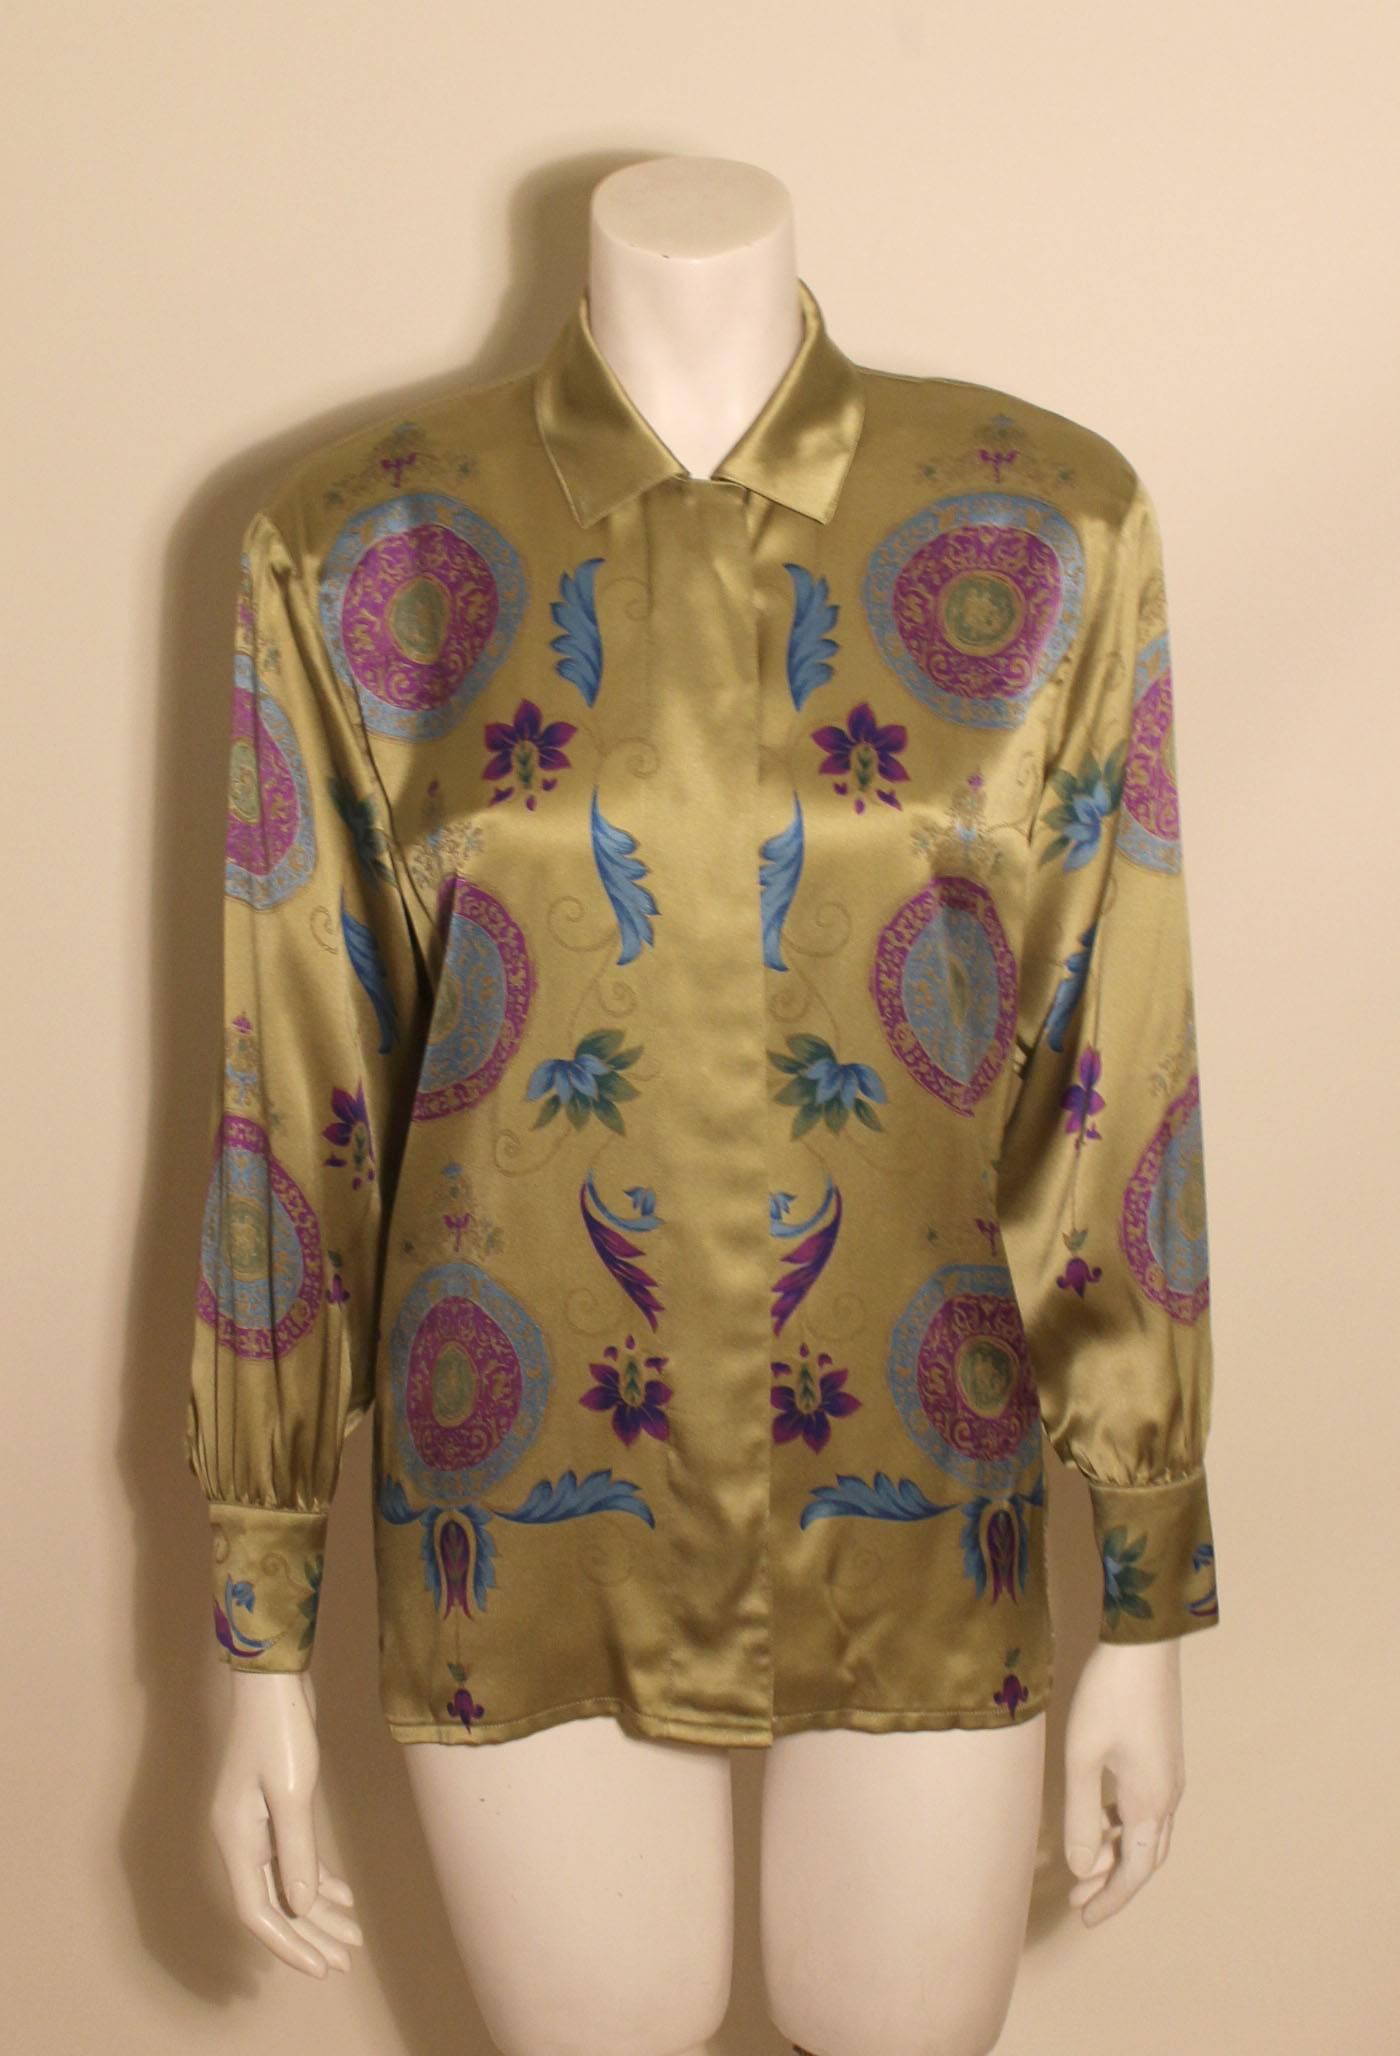 100% silk vintage blouse from Escada featuring a jewel tone pattern of florals and medals on a rich gold/olive background. It has a sleek hidden placket front and two buttons at the sleeves. 